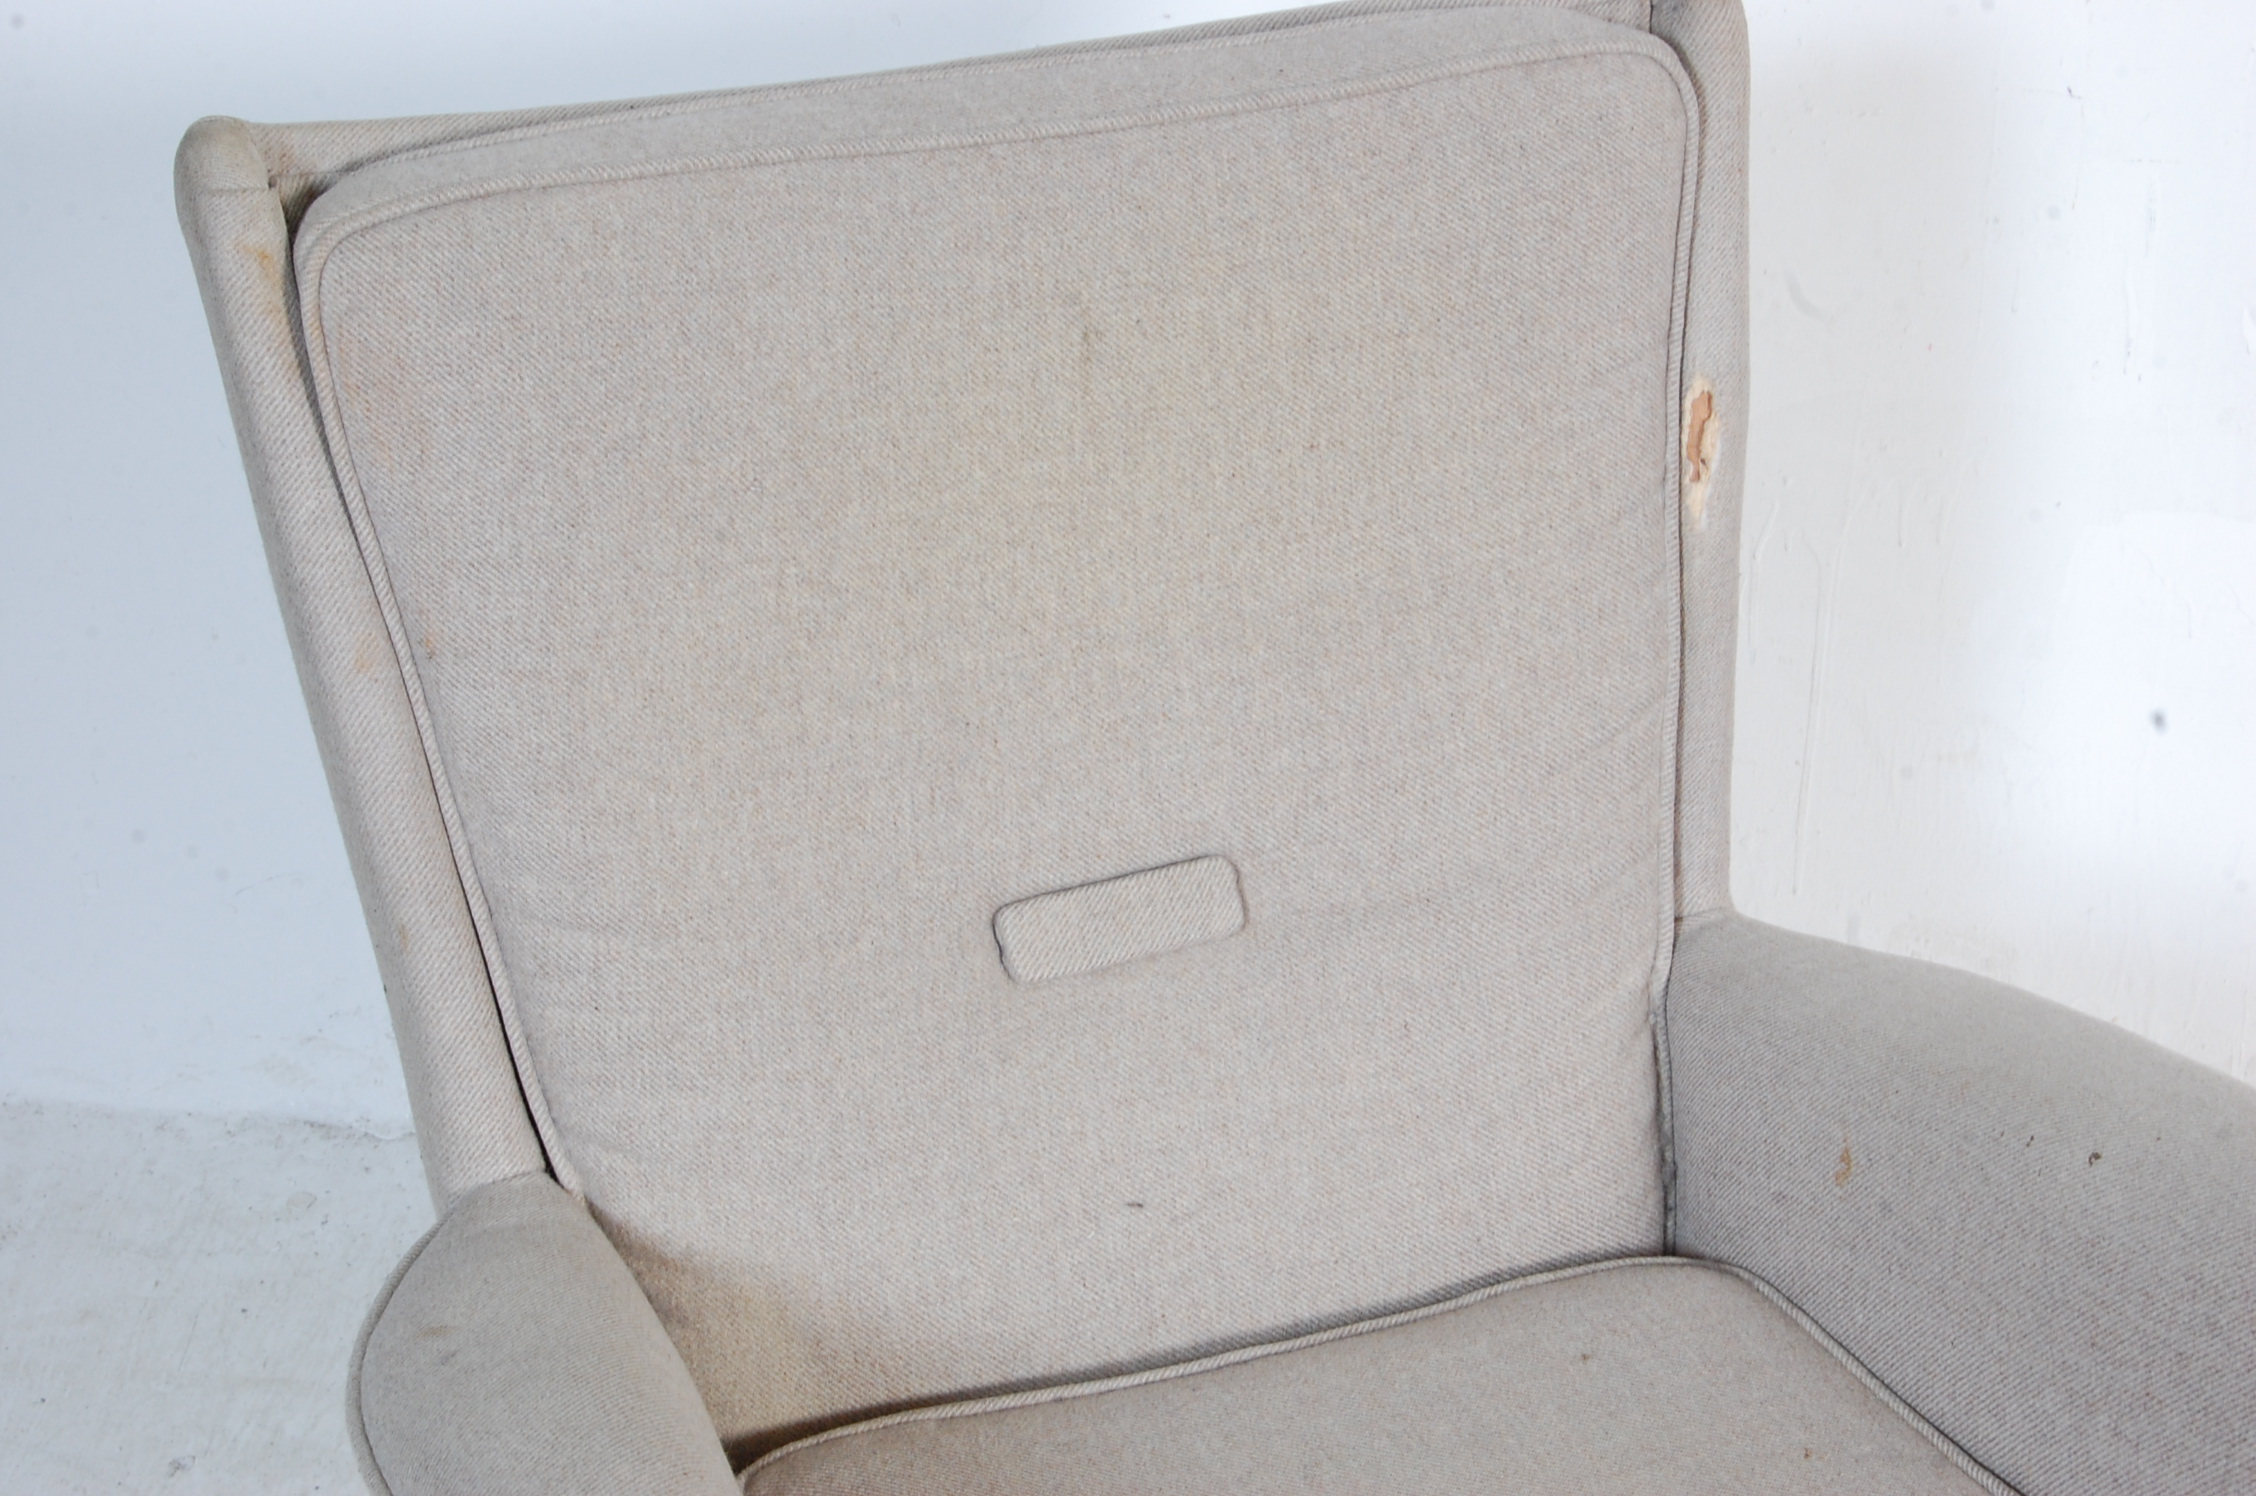 RETRO VINTAGE DANISH INSPIRED ARMCHAIR / EASY CHAIR - Image 3 of 5